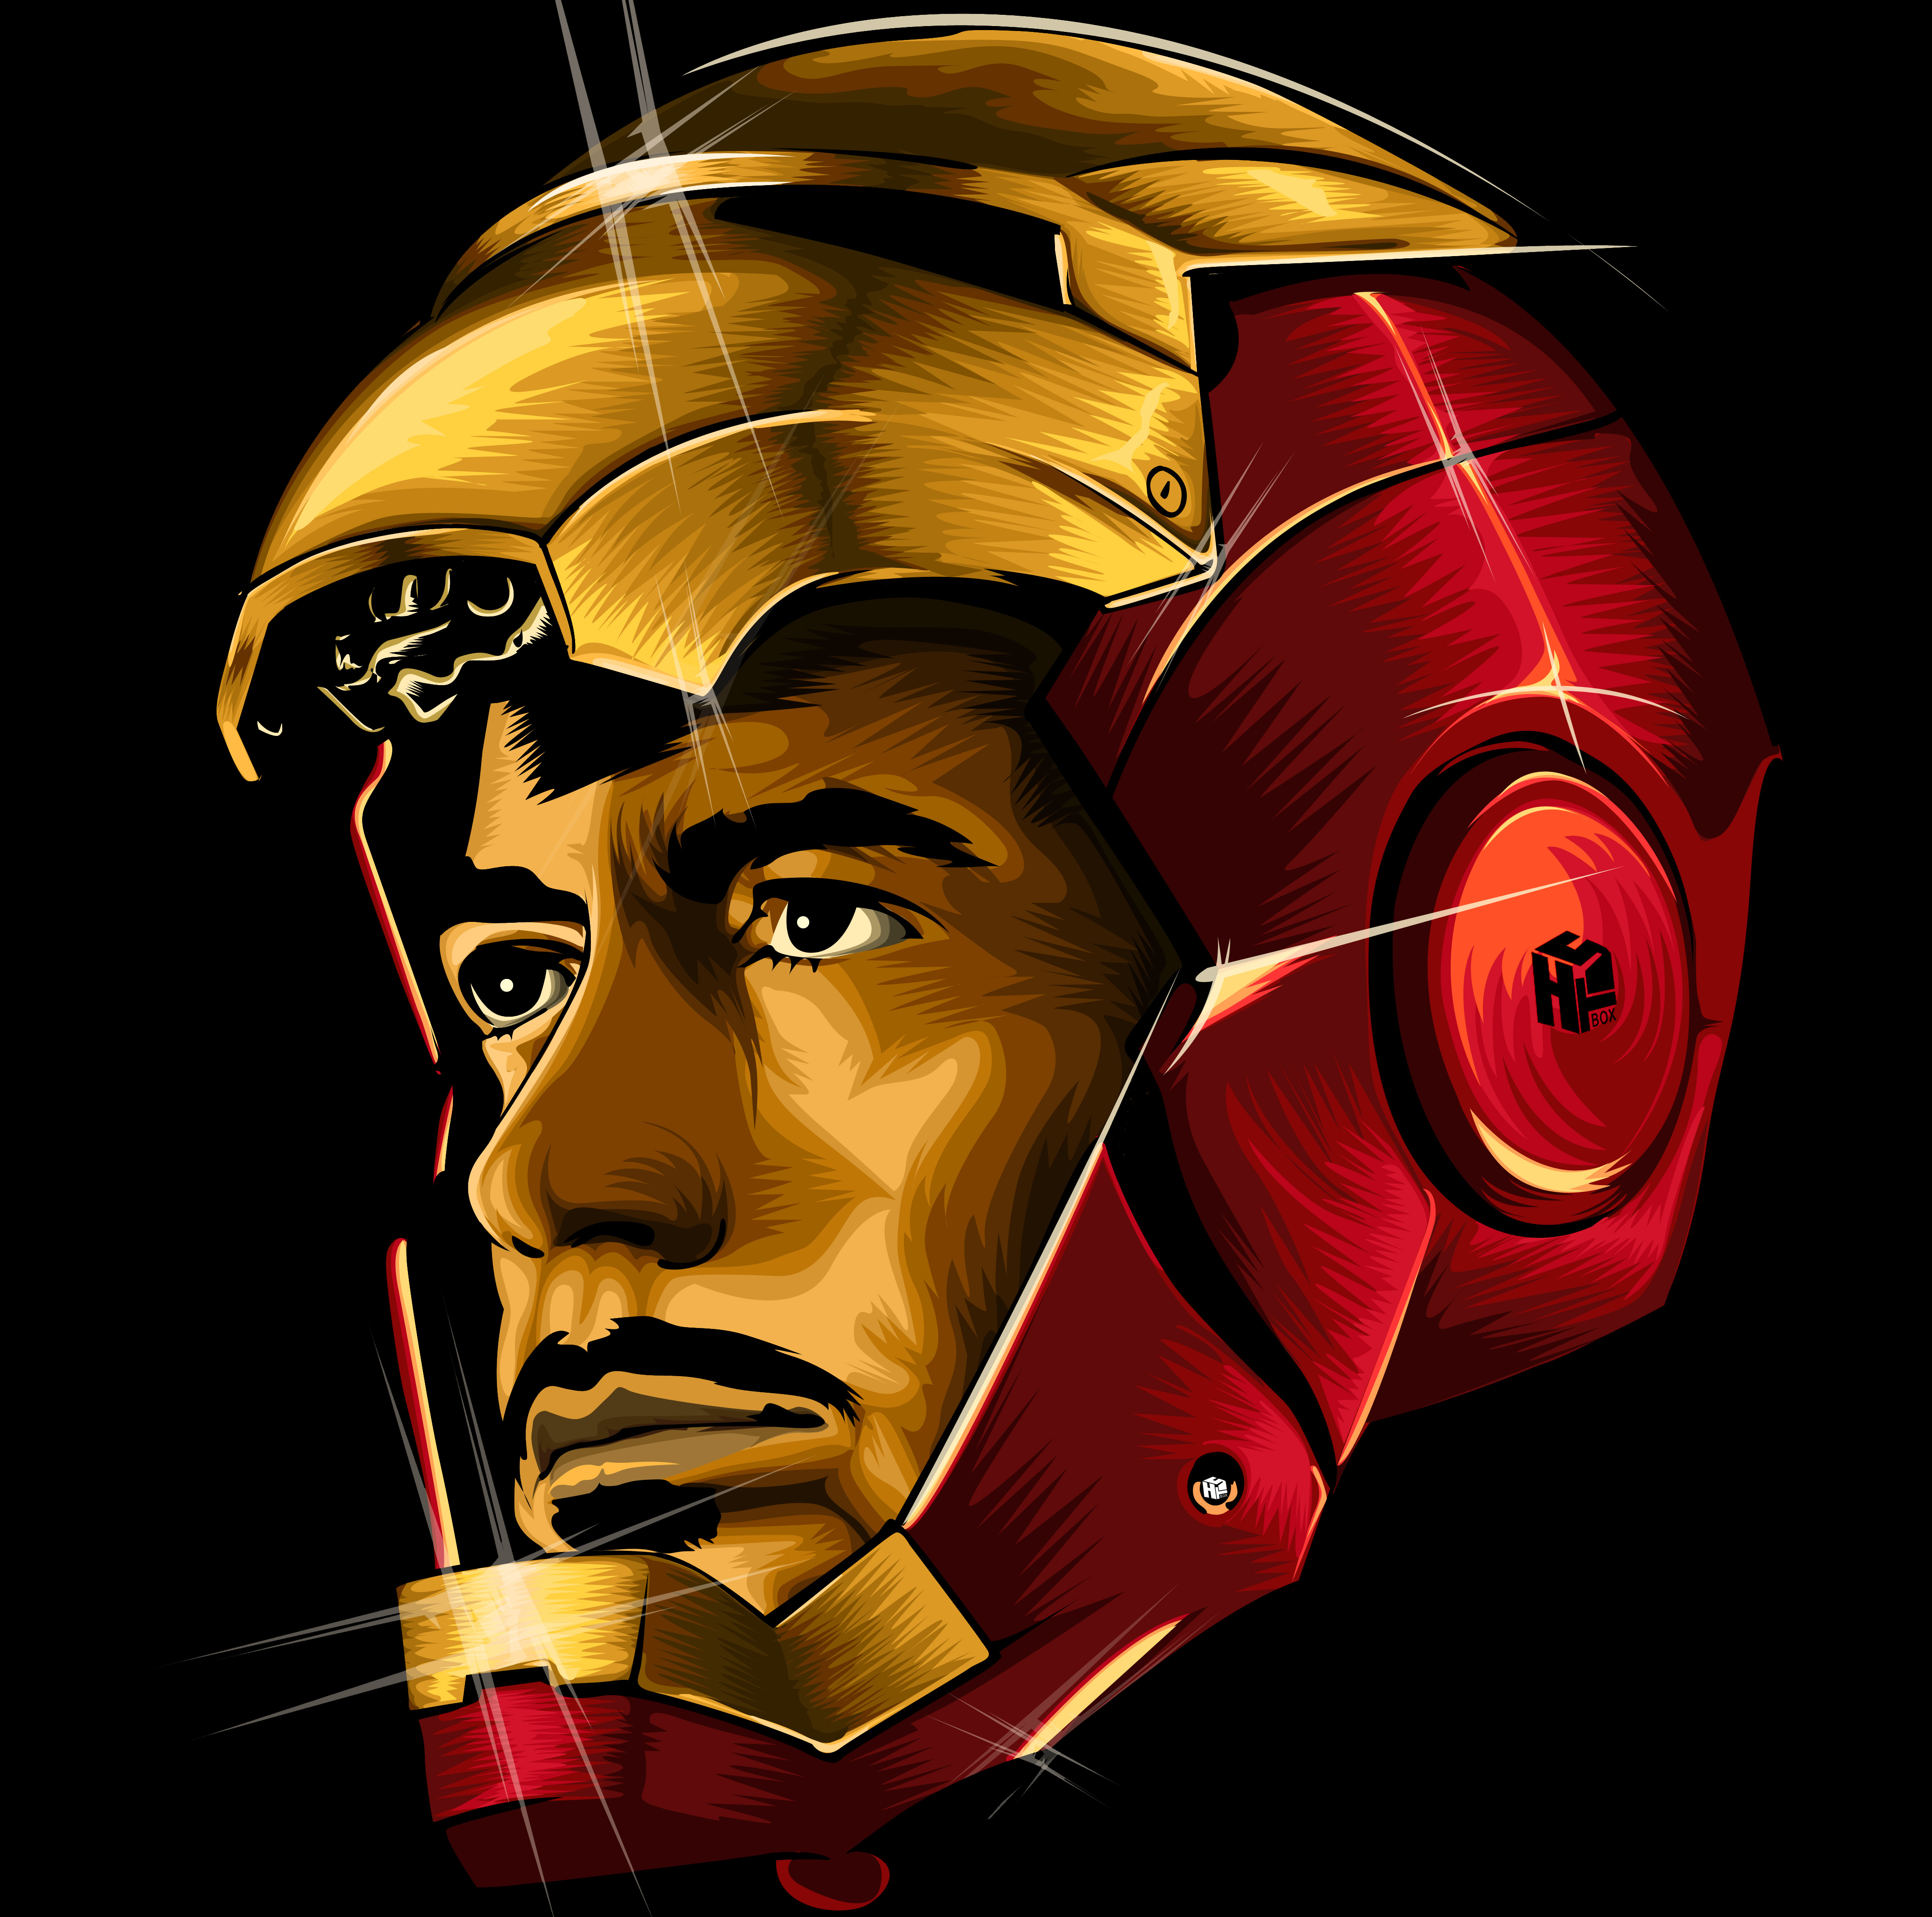 Iron Man Helmet Wallpapers For Android Wallpaper.